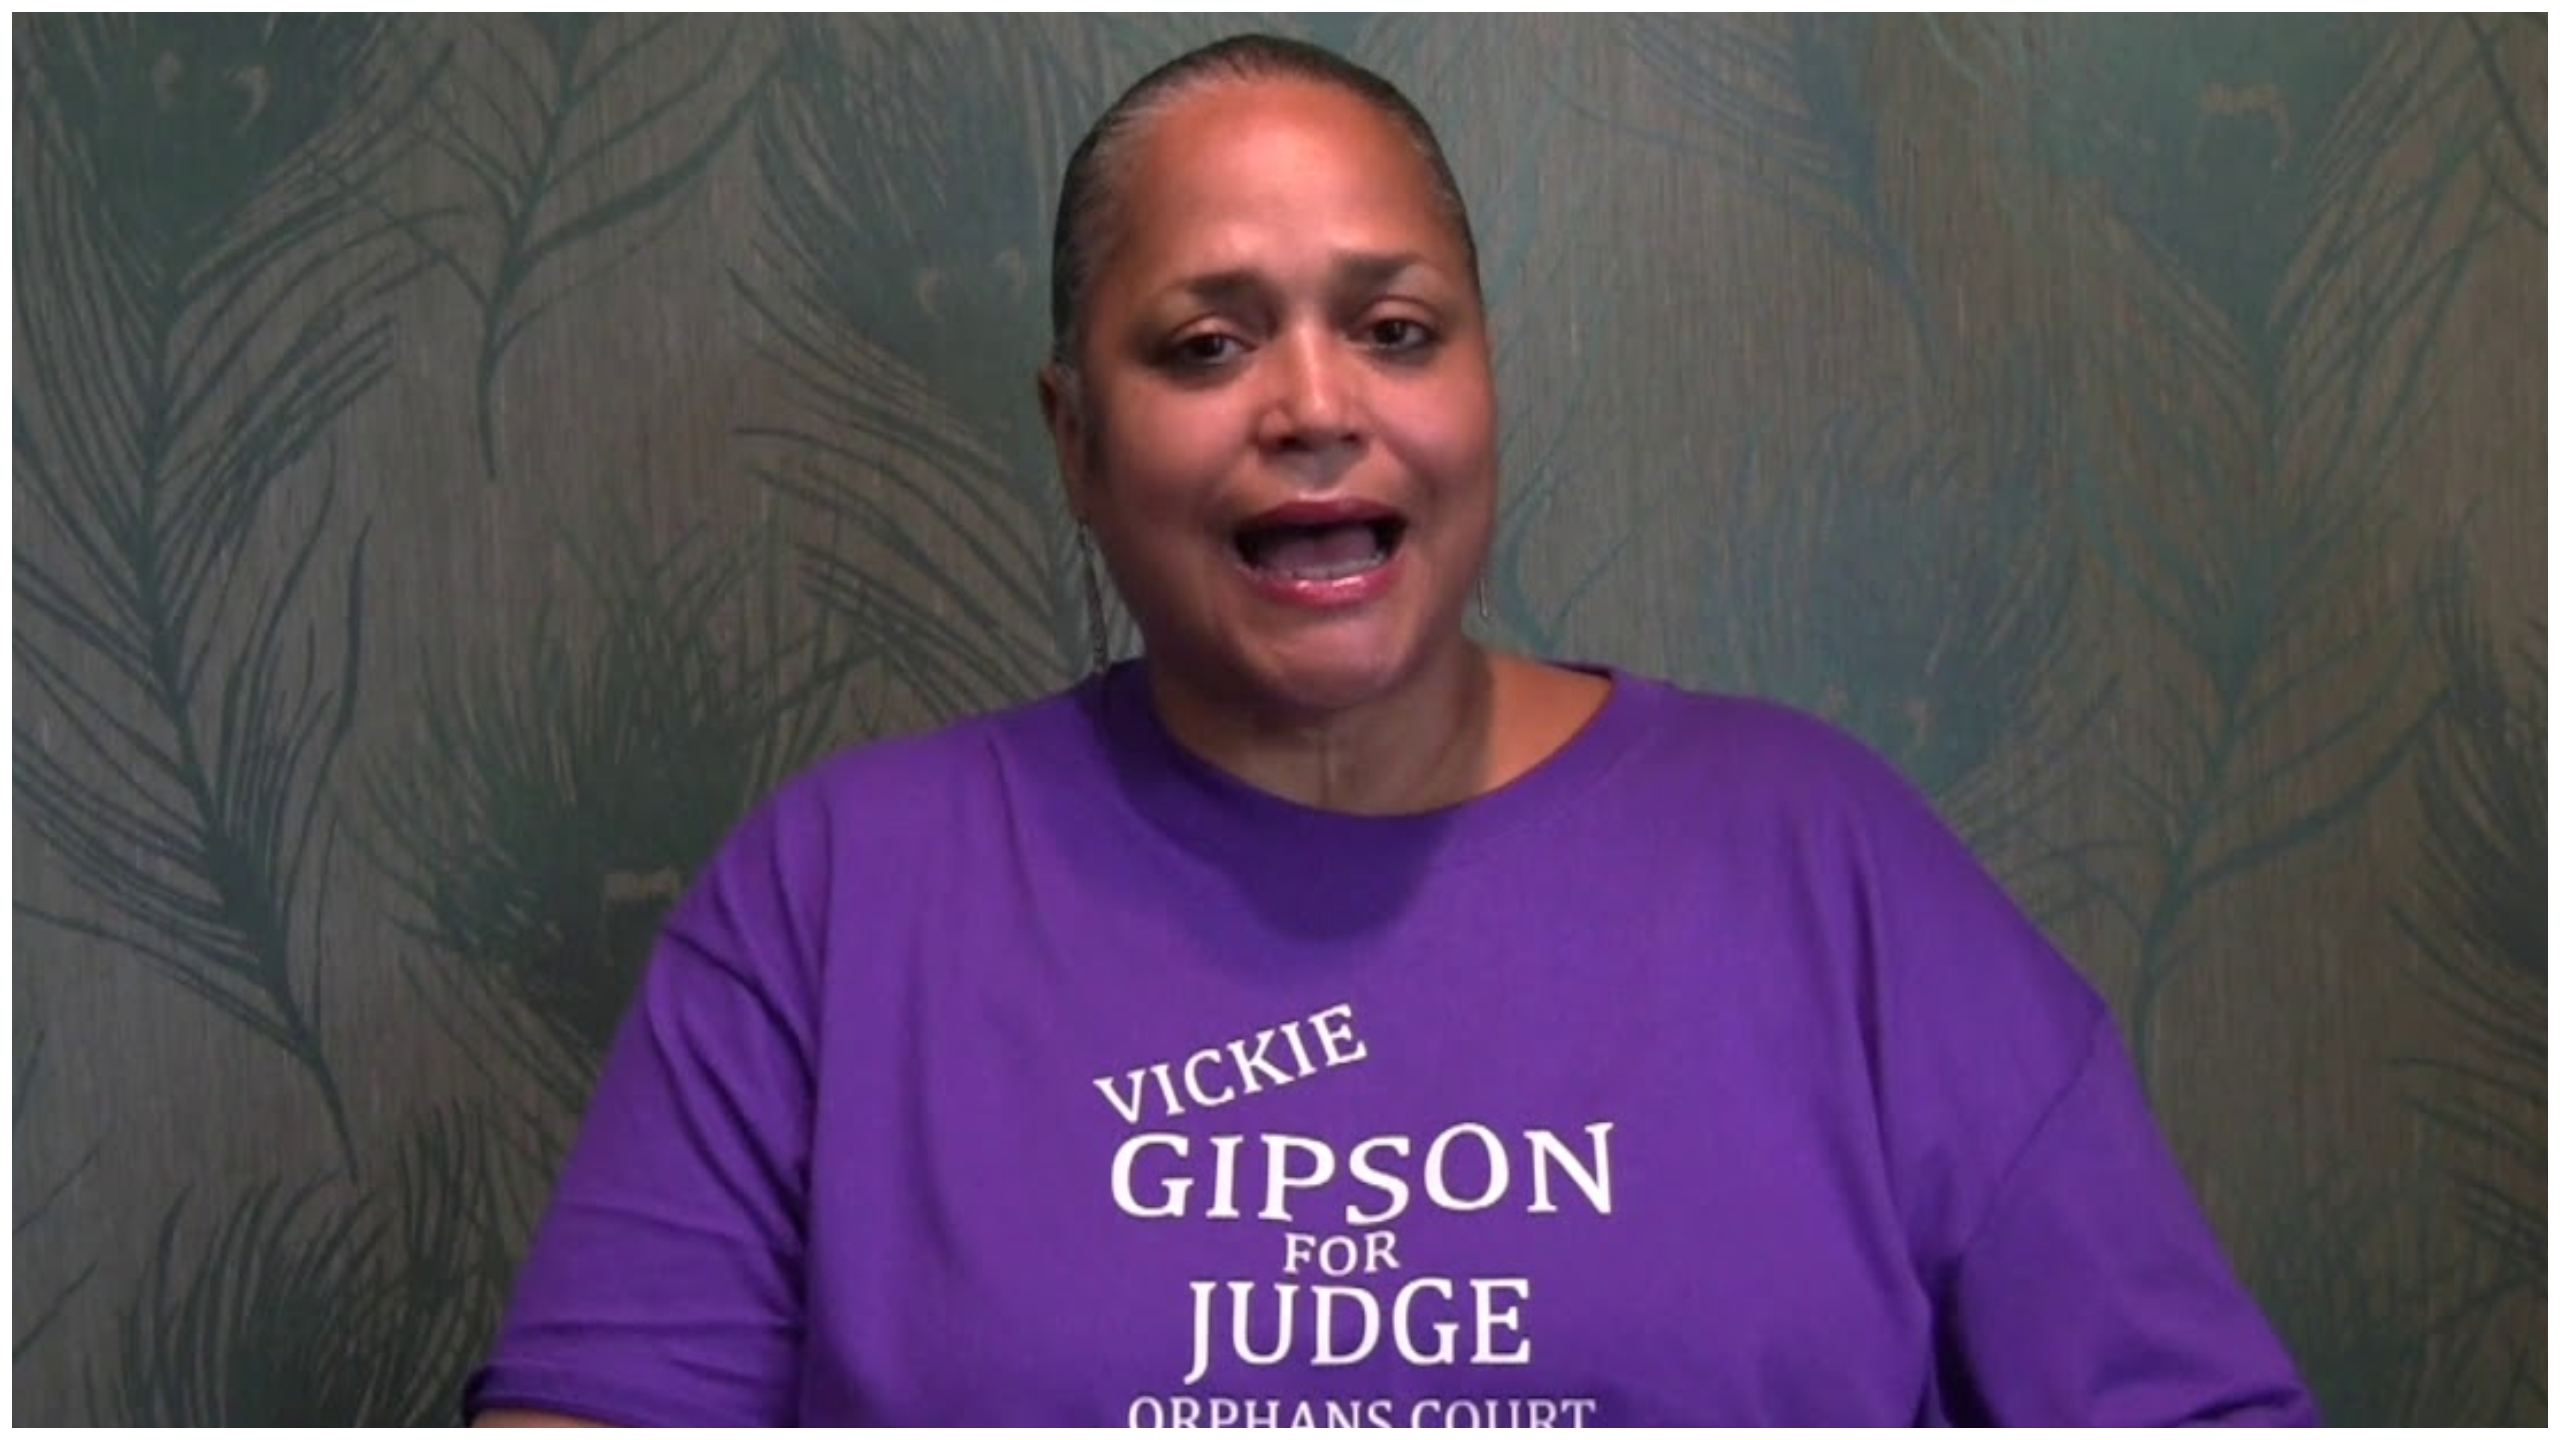 How Vickie Gipson Broke Barriers By Becoming Chief Judge And The First Black Person To Lead The Orphans Court Bench In Anne Arundel County